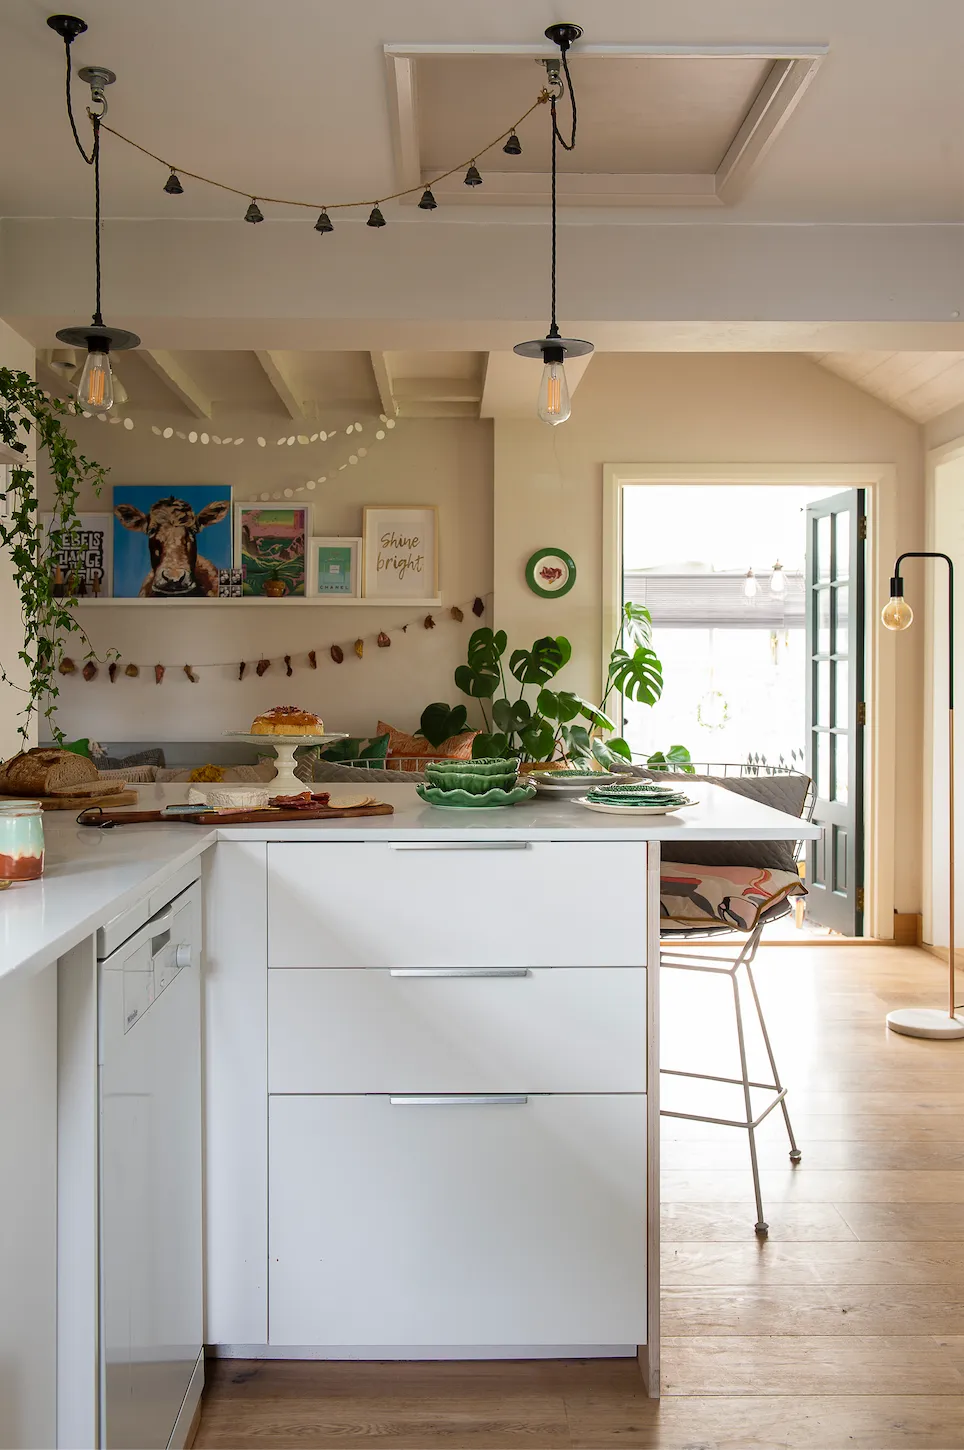 Kitchen makeover: ‘We kept everything in shades of white'